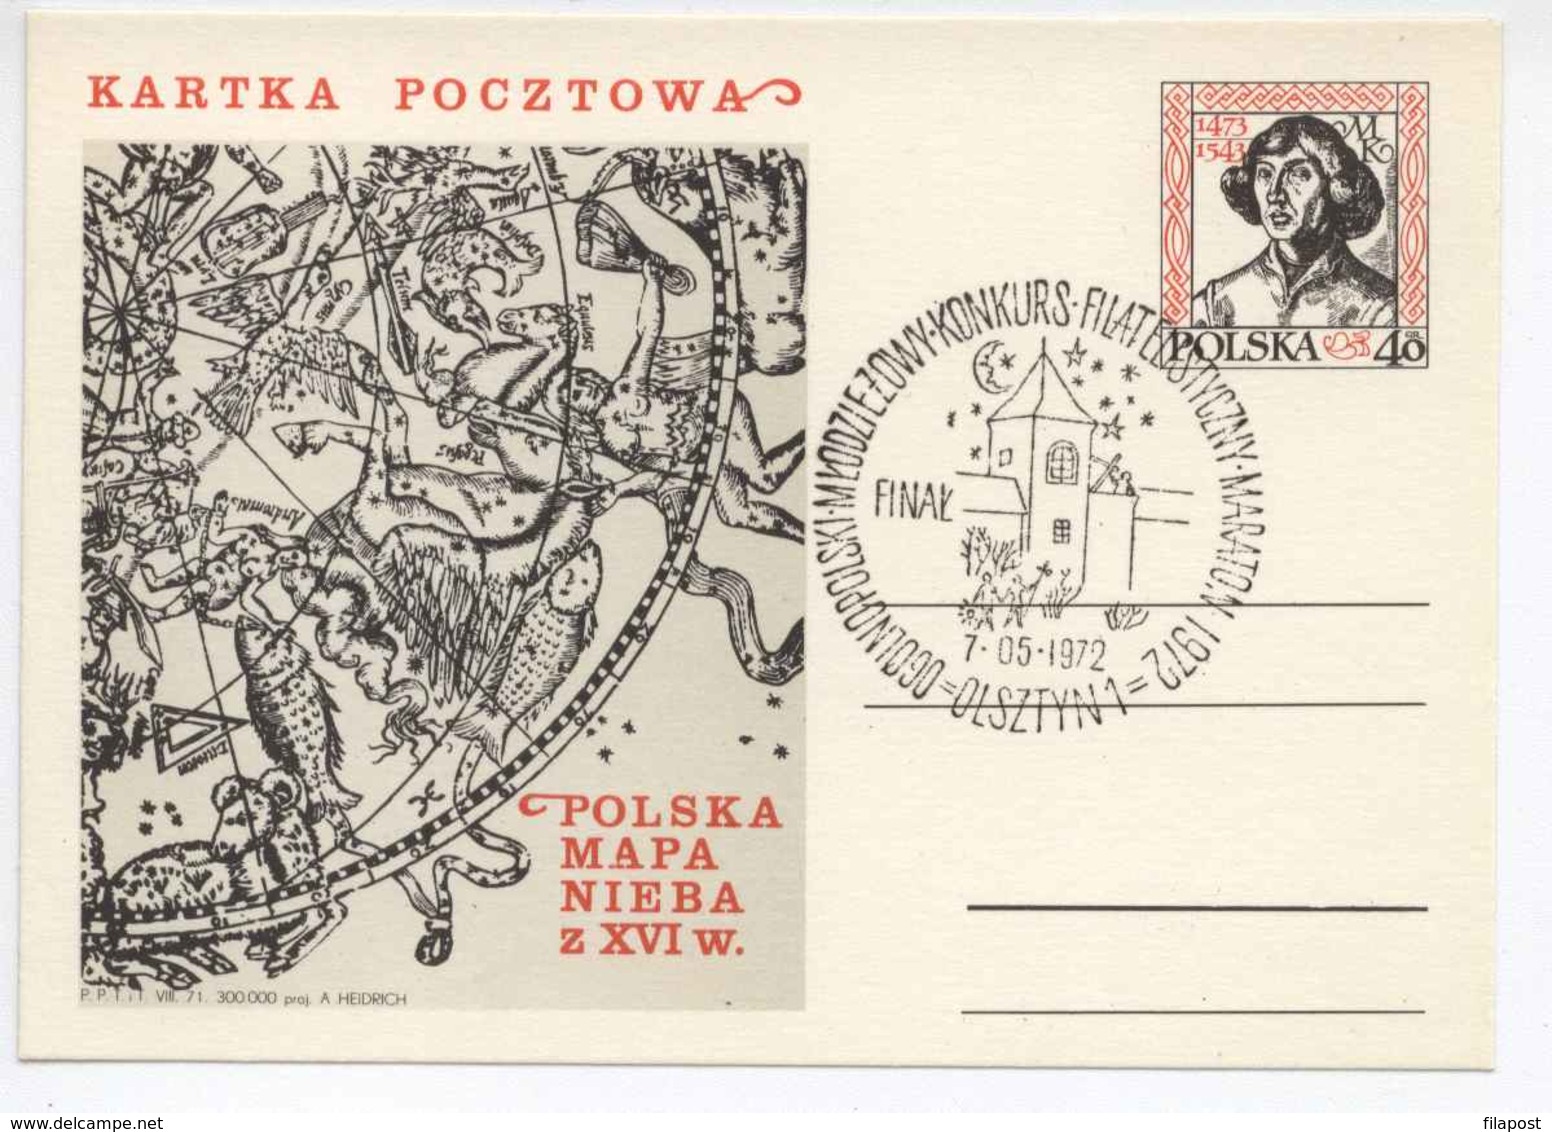 Poland 1972 Astronomy Copernicus On The Tower Frombork, Allenstein  /  Postal Stationery  Occas. Cancellation  H406 - Astronomy